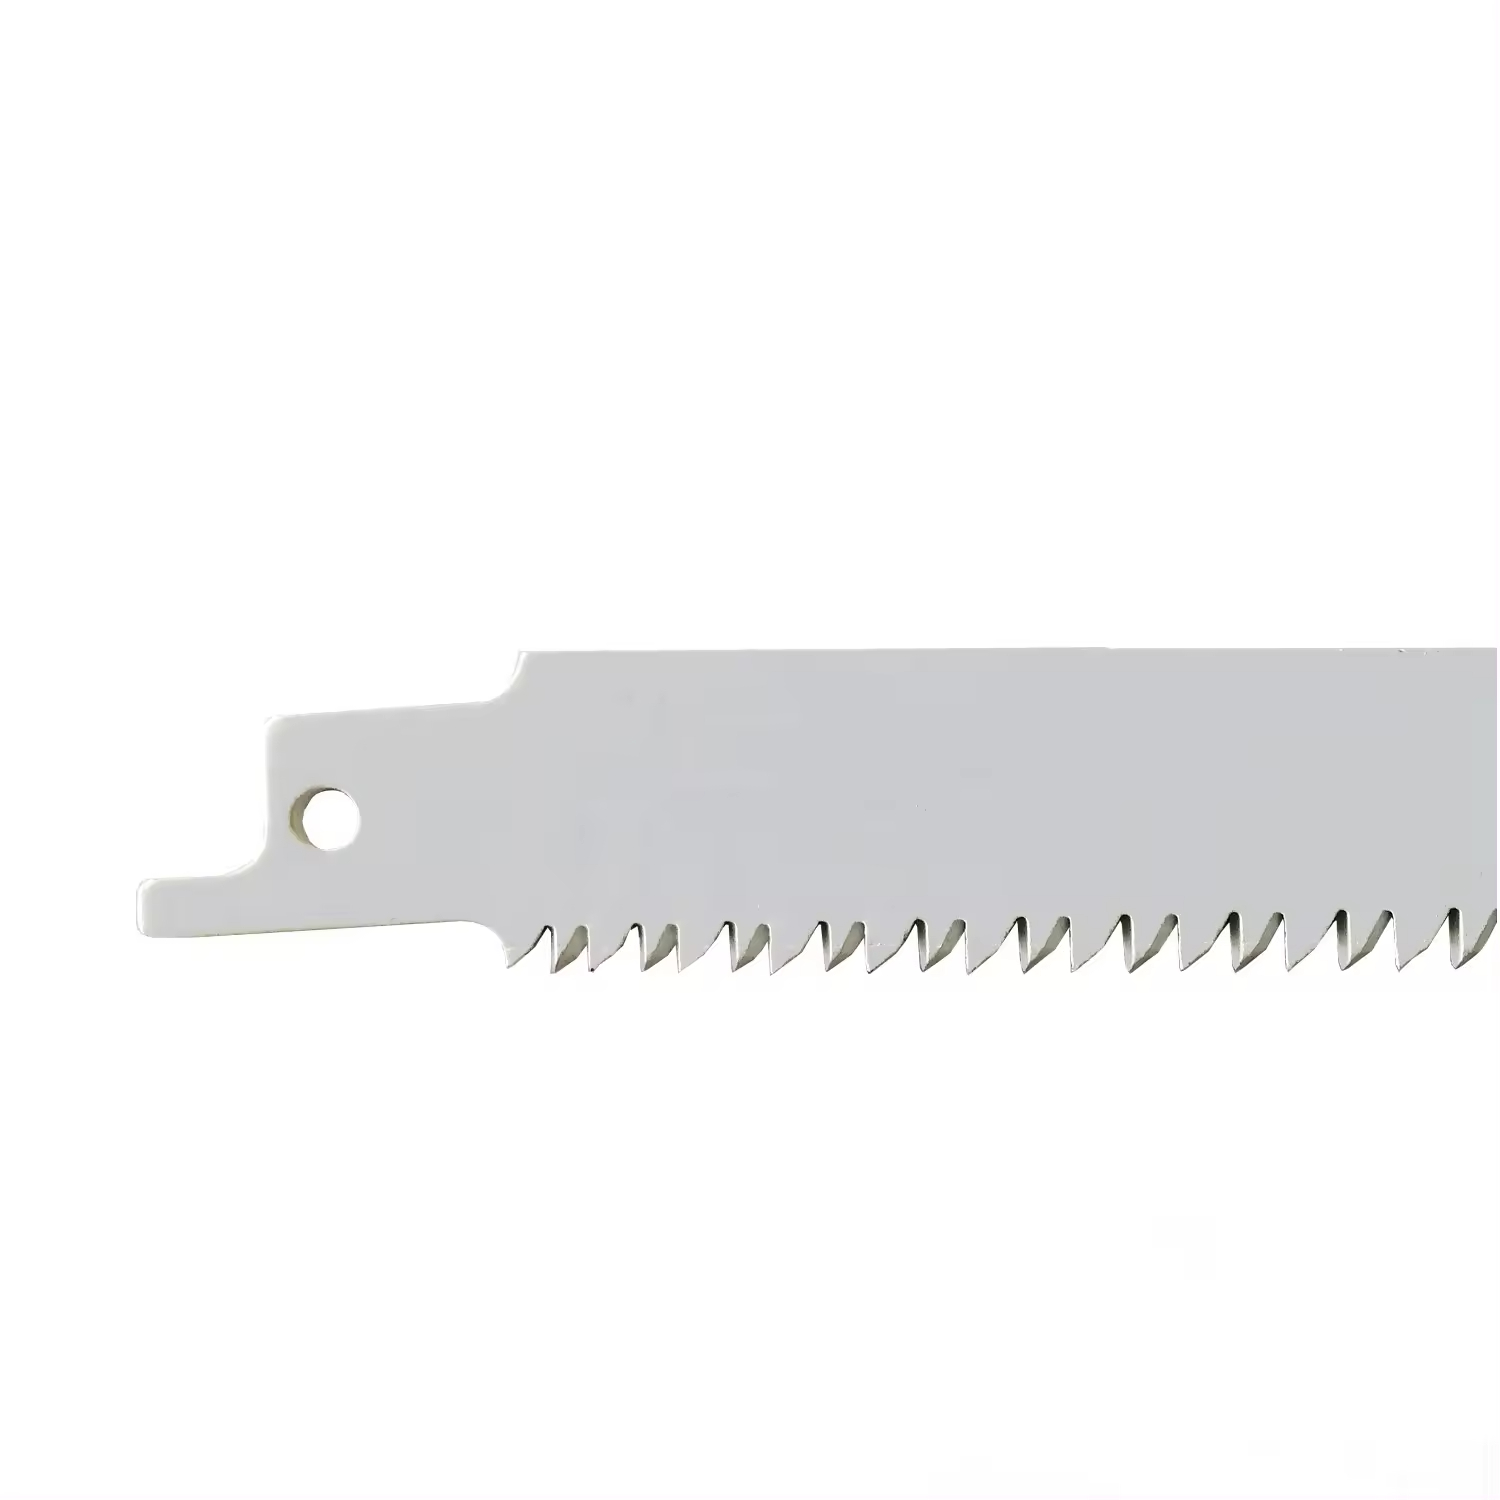 Hantechn@ Customer Hot Sell Hcs Reciprocating Saw Blades For Coarse Wood Tree Cutting And Pruning